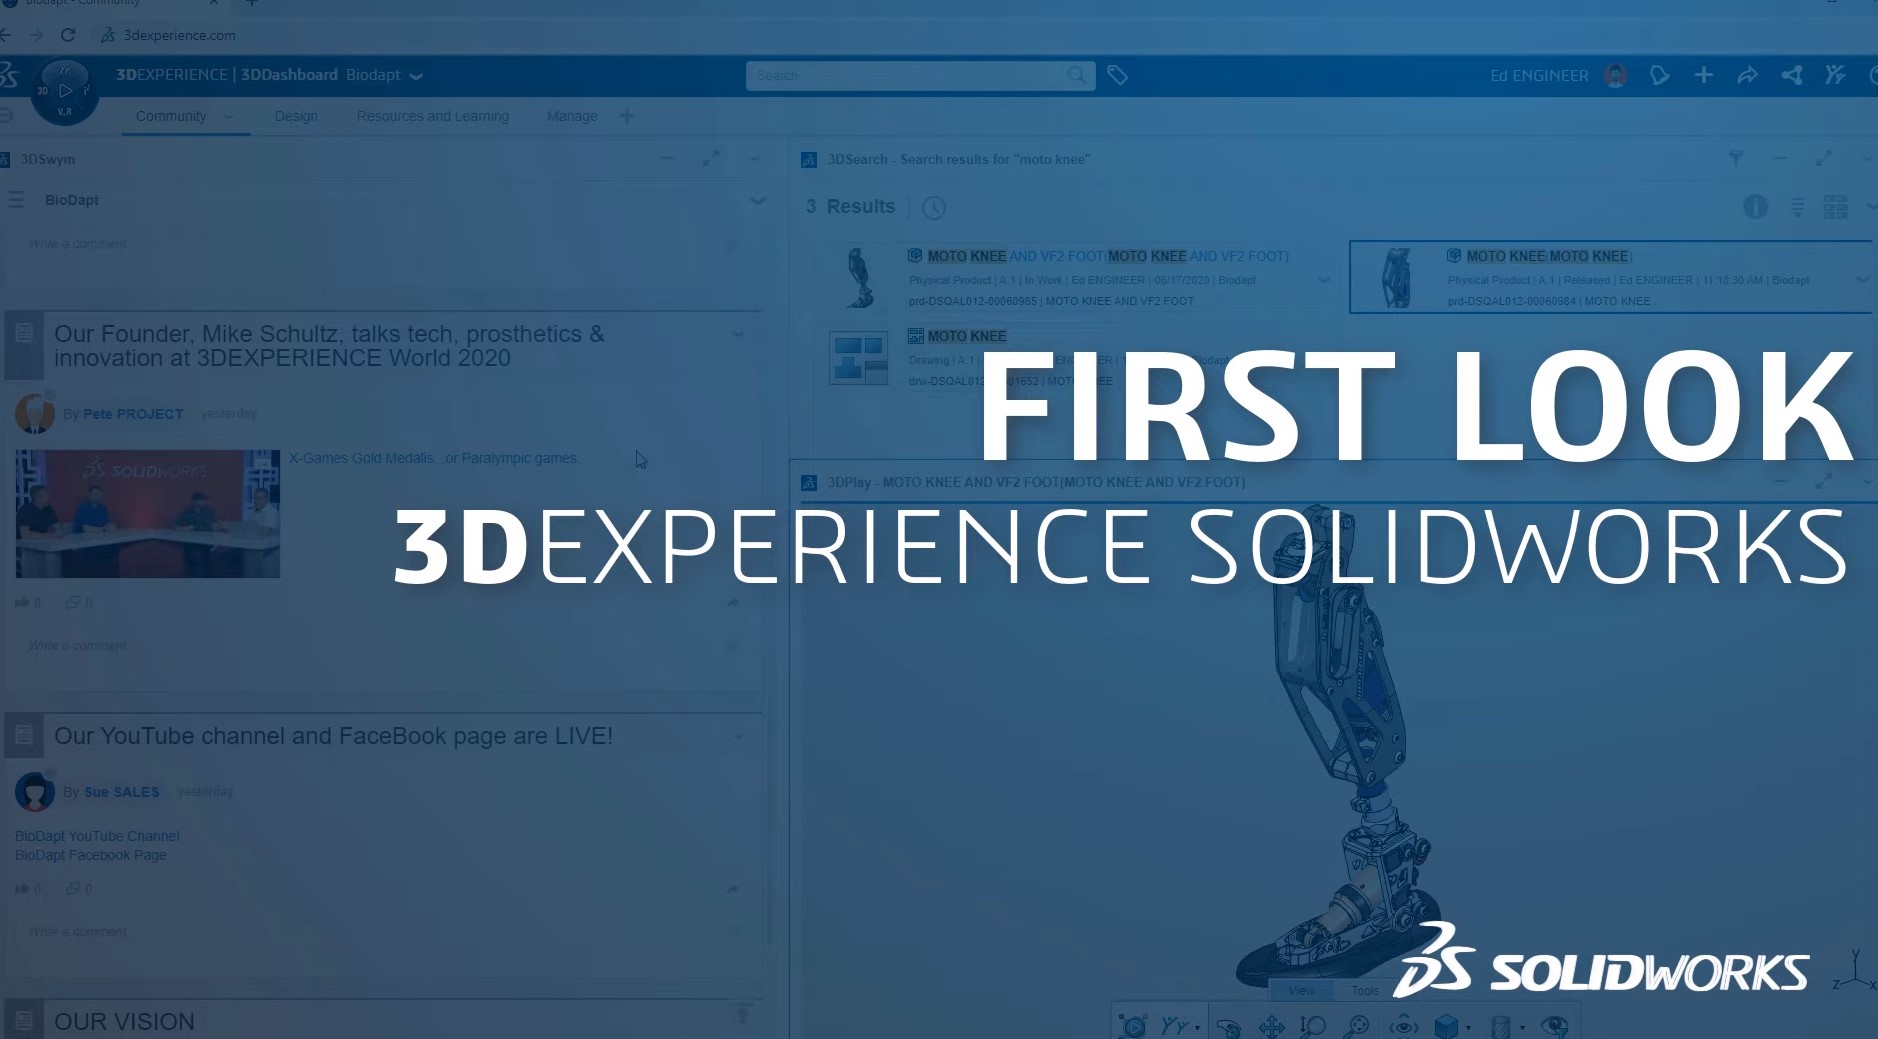 First Look 3dexperience solidworks